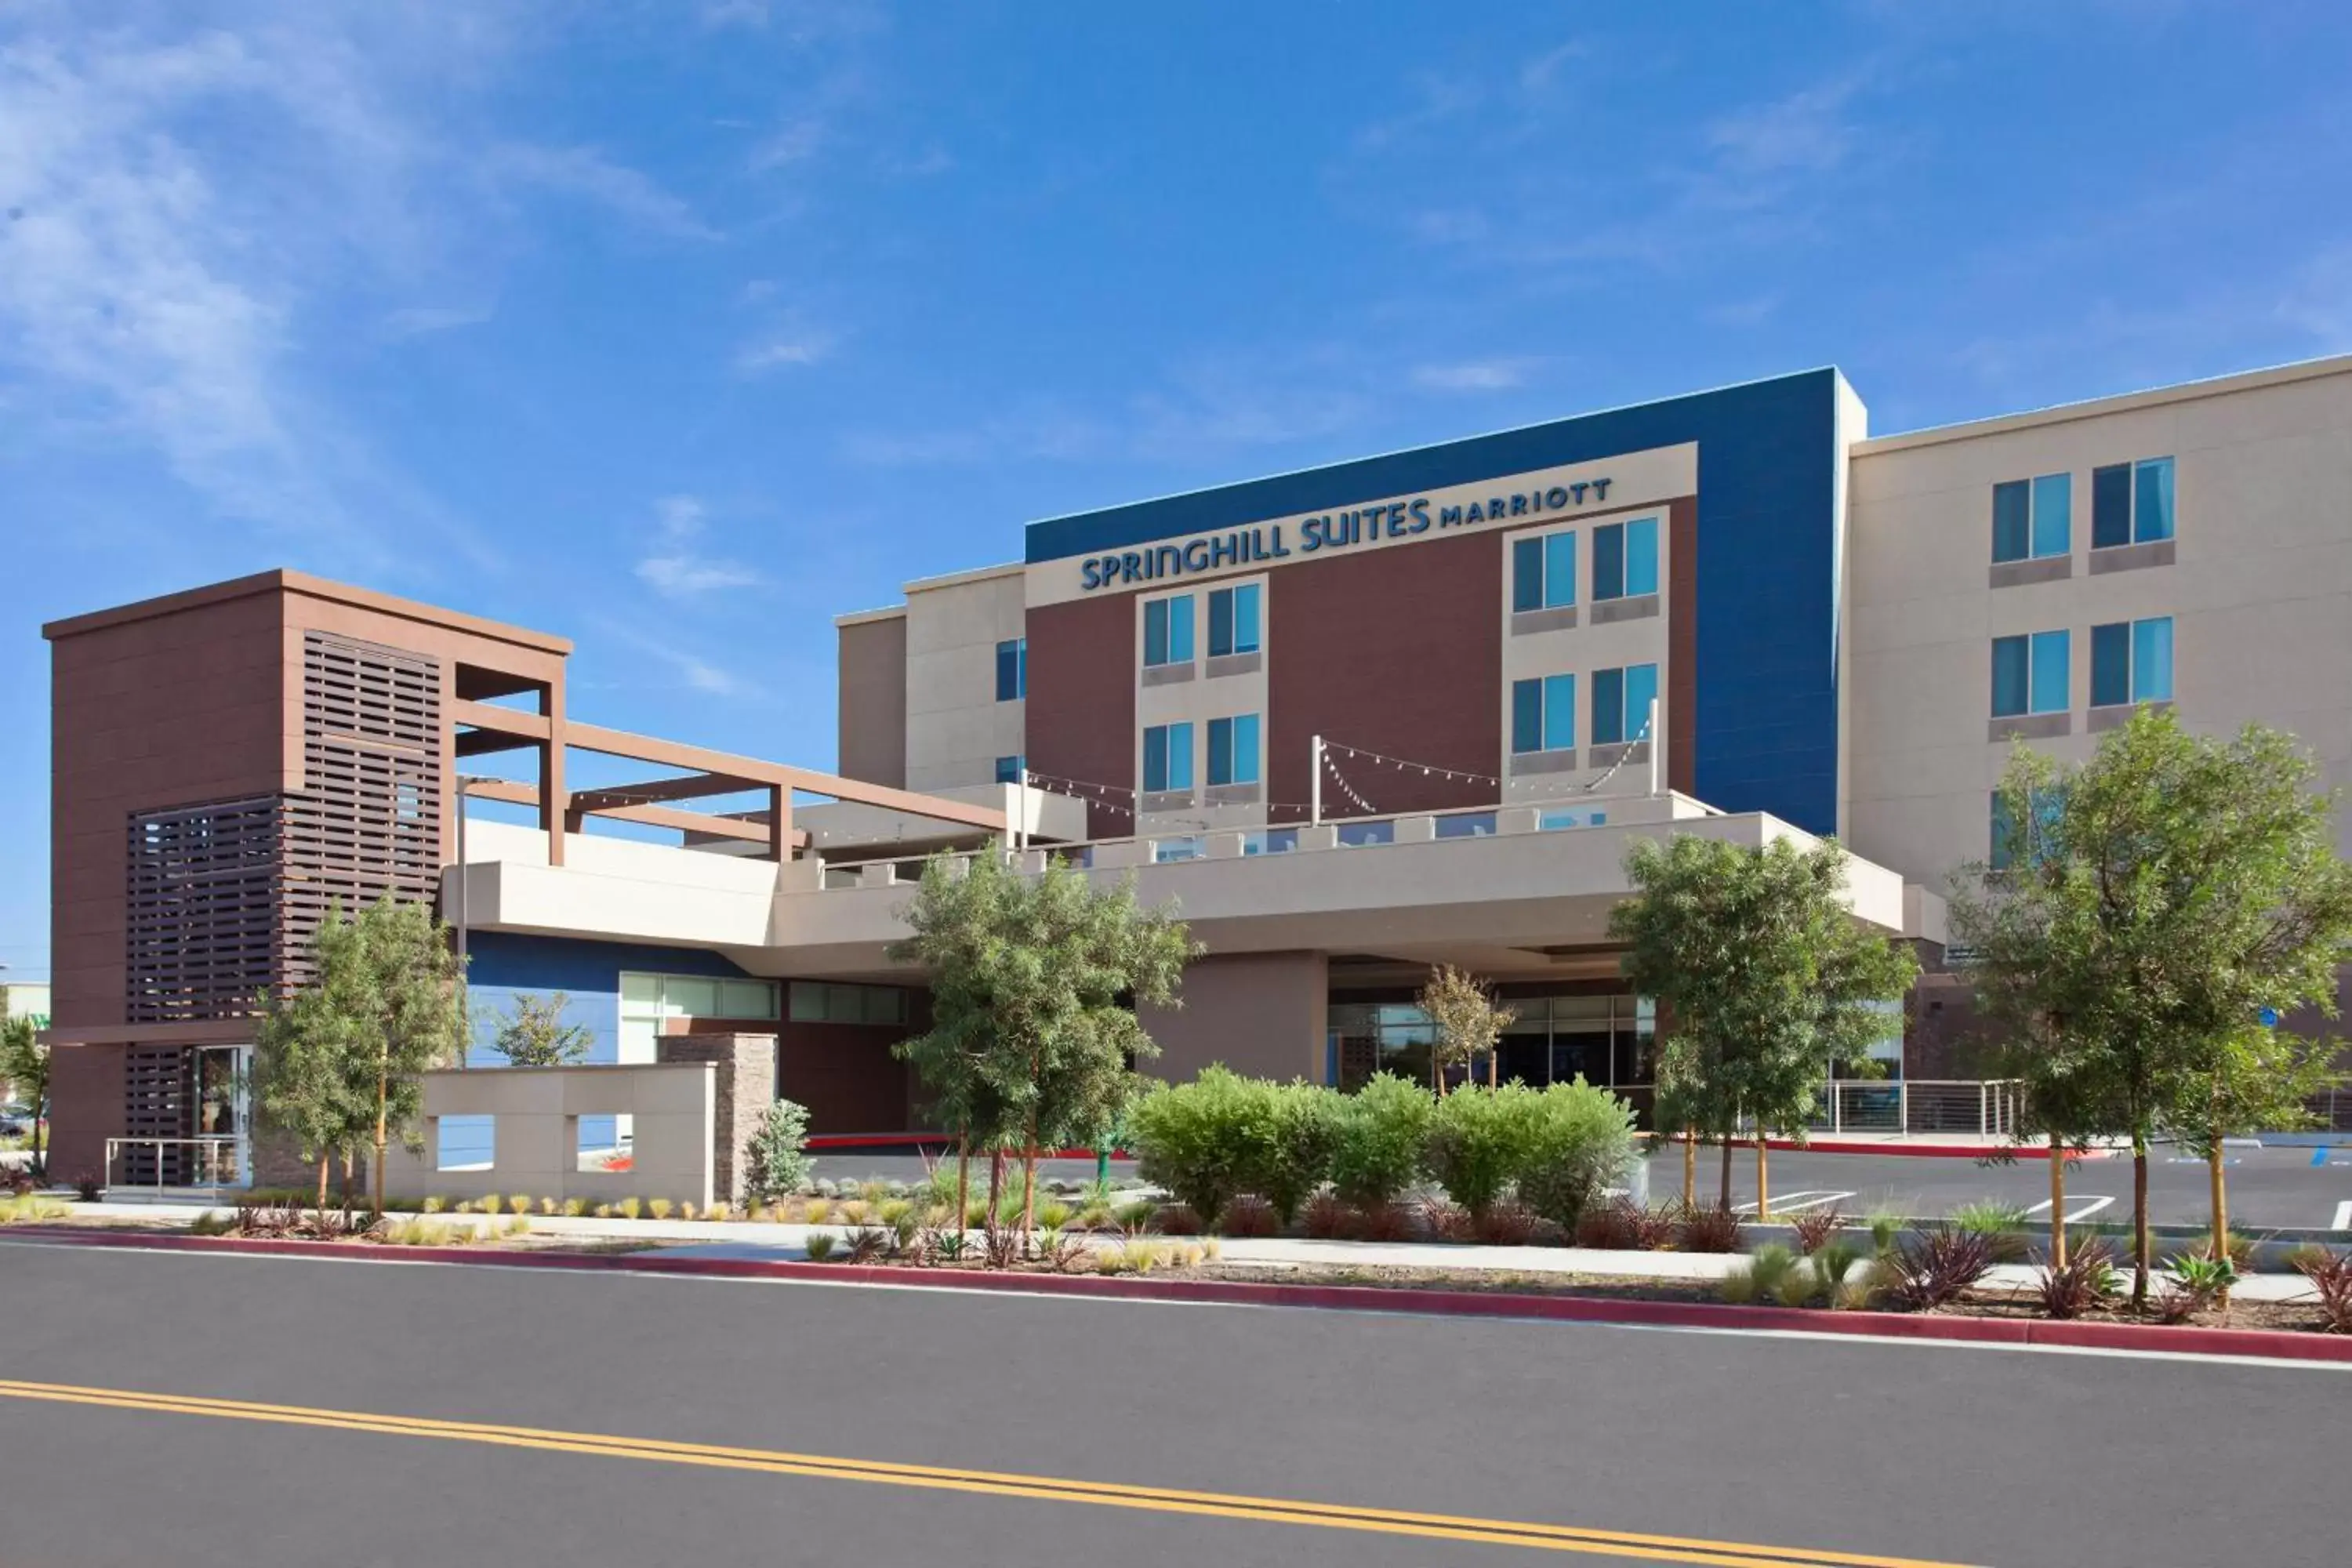 Property Building in SpringHill Suites by Marriott Huntington Beach Orange County